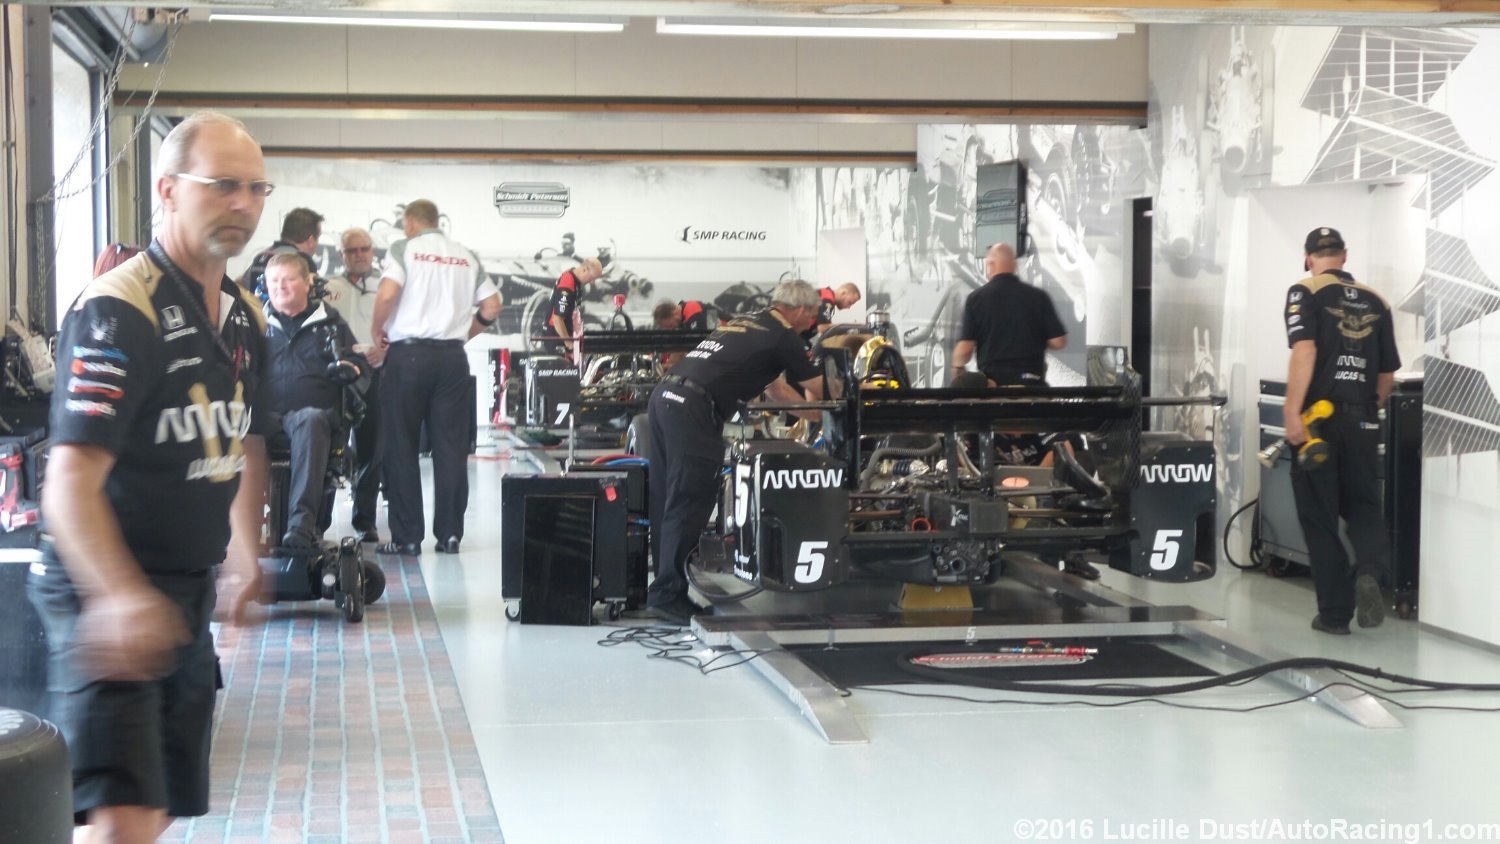 Sam Schmidt (in wheelchair) has his Indy Garage all pimped out